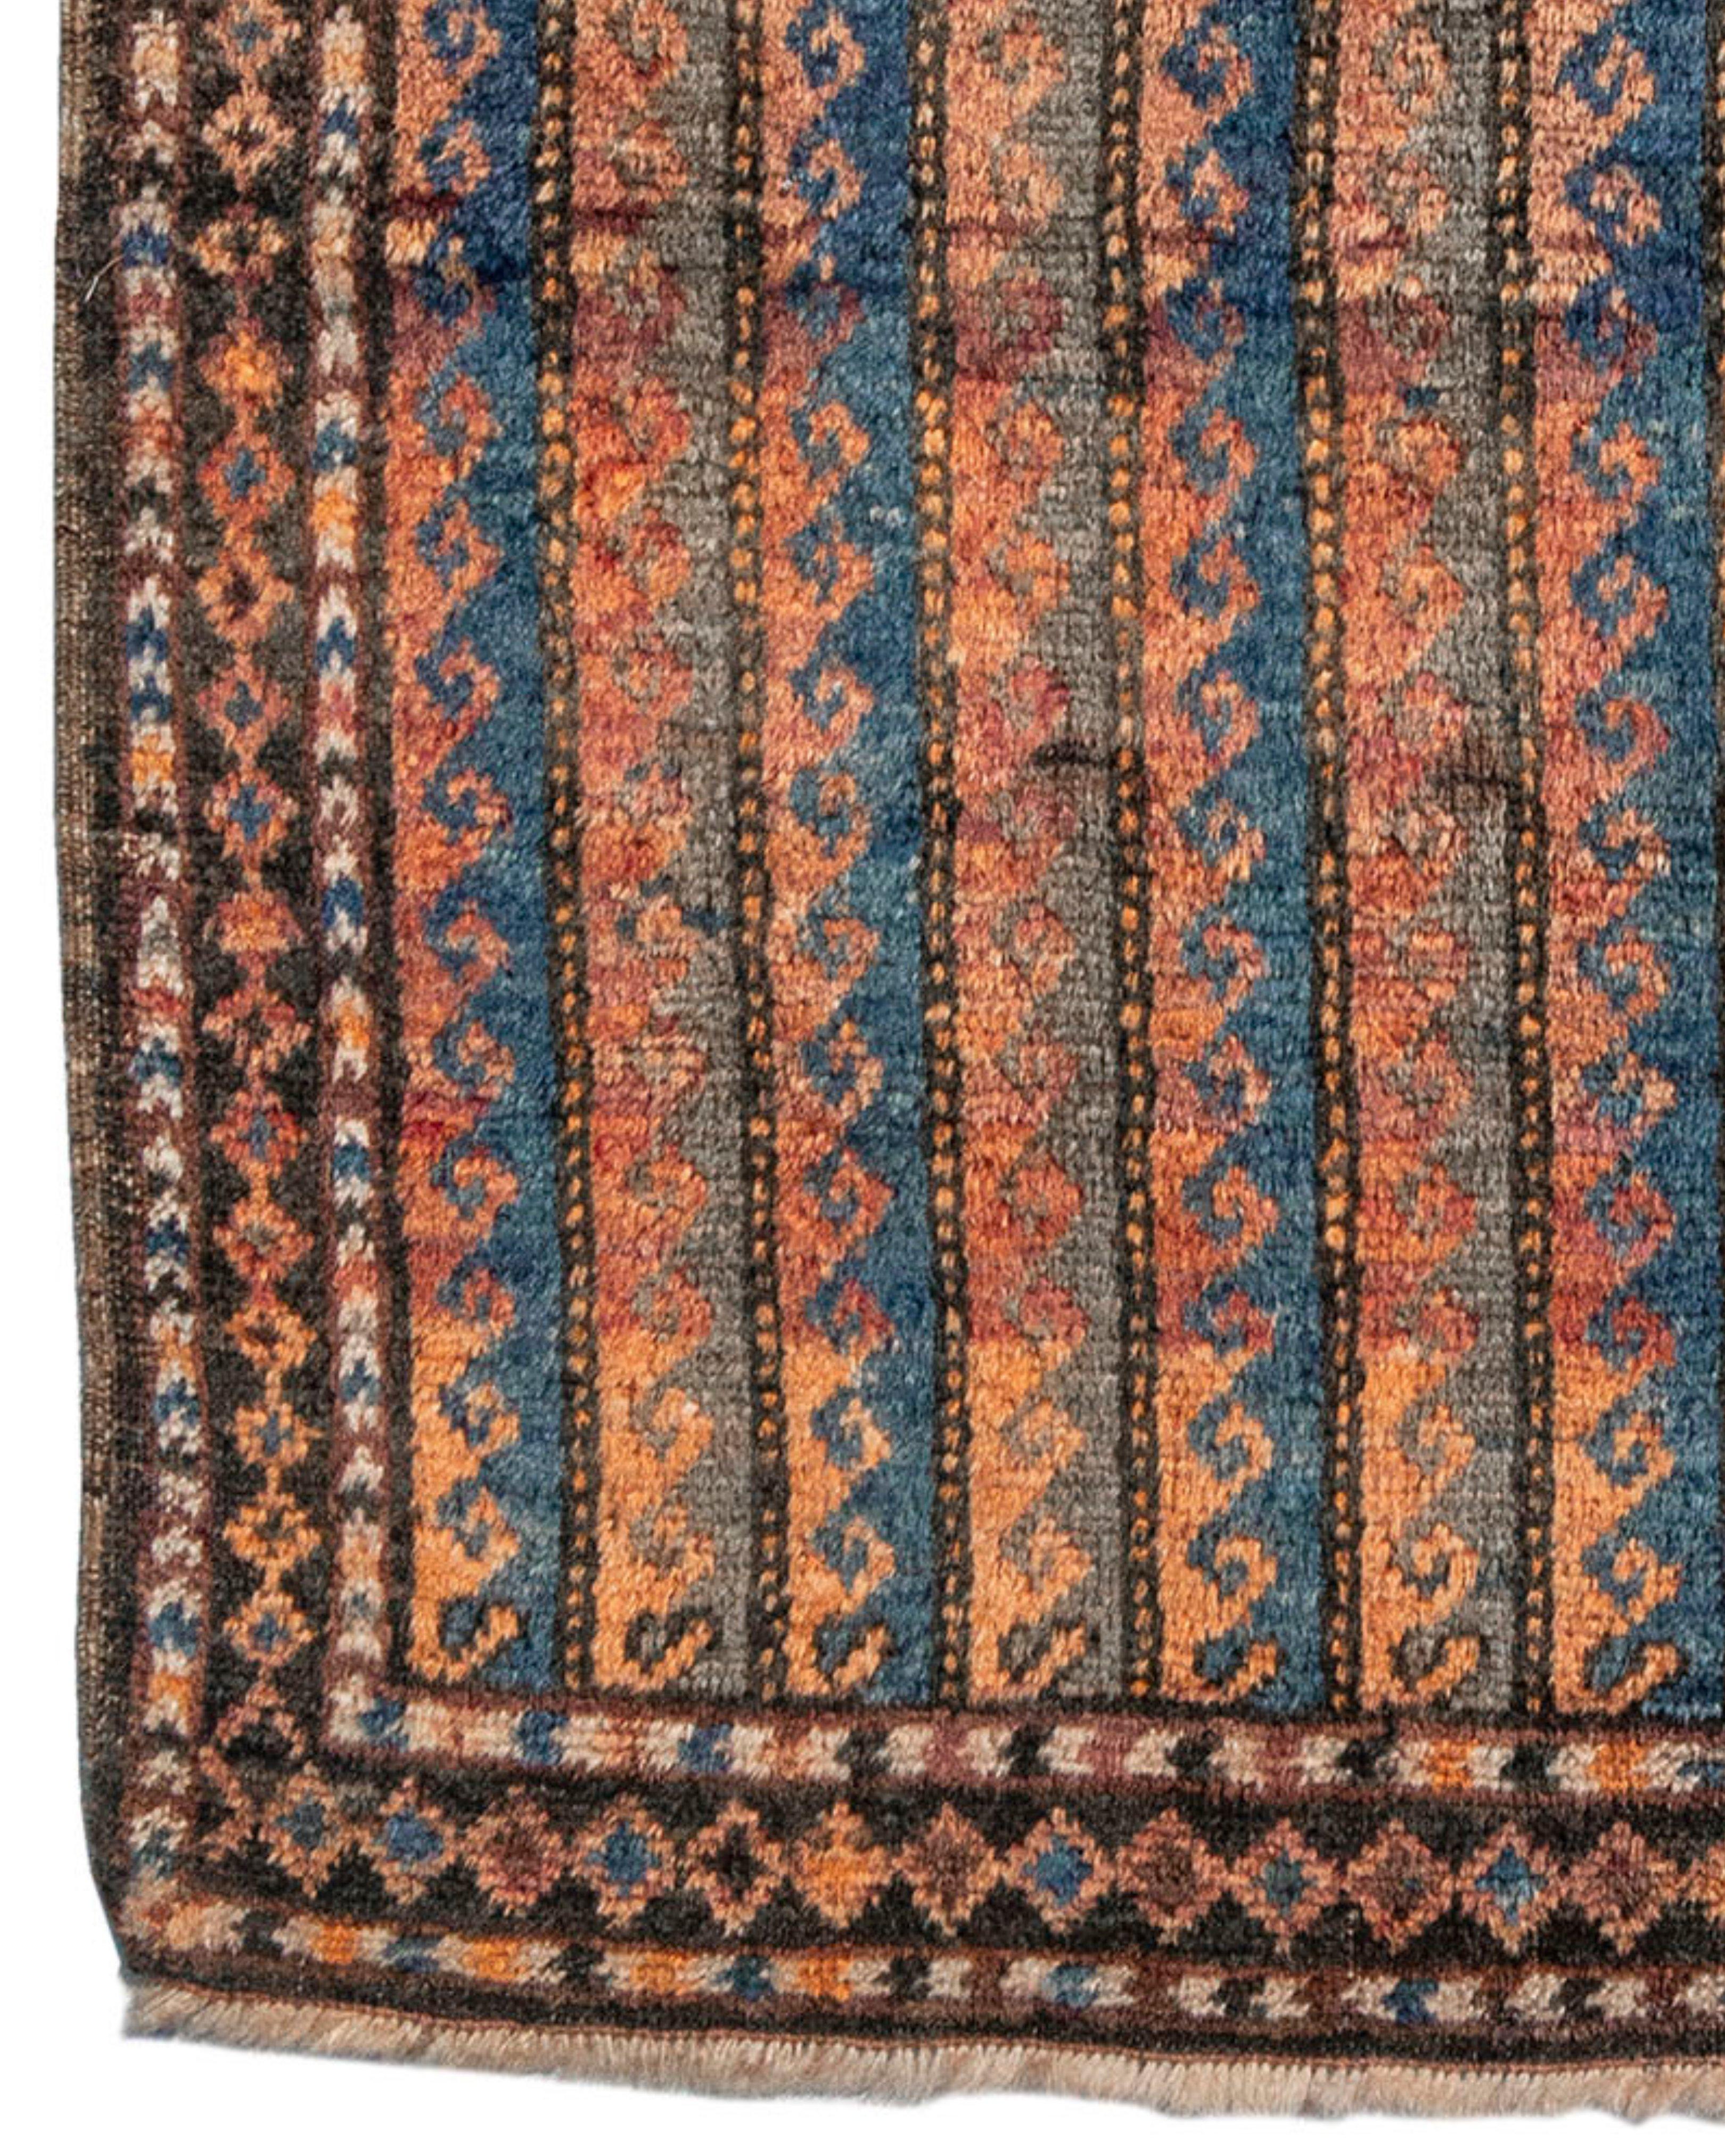 Hand-Knotted Baluch Prayer Rug, Late 19th Century